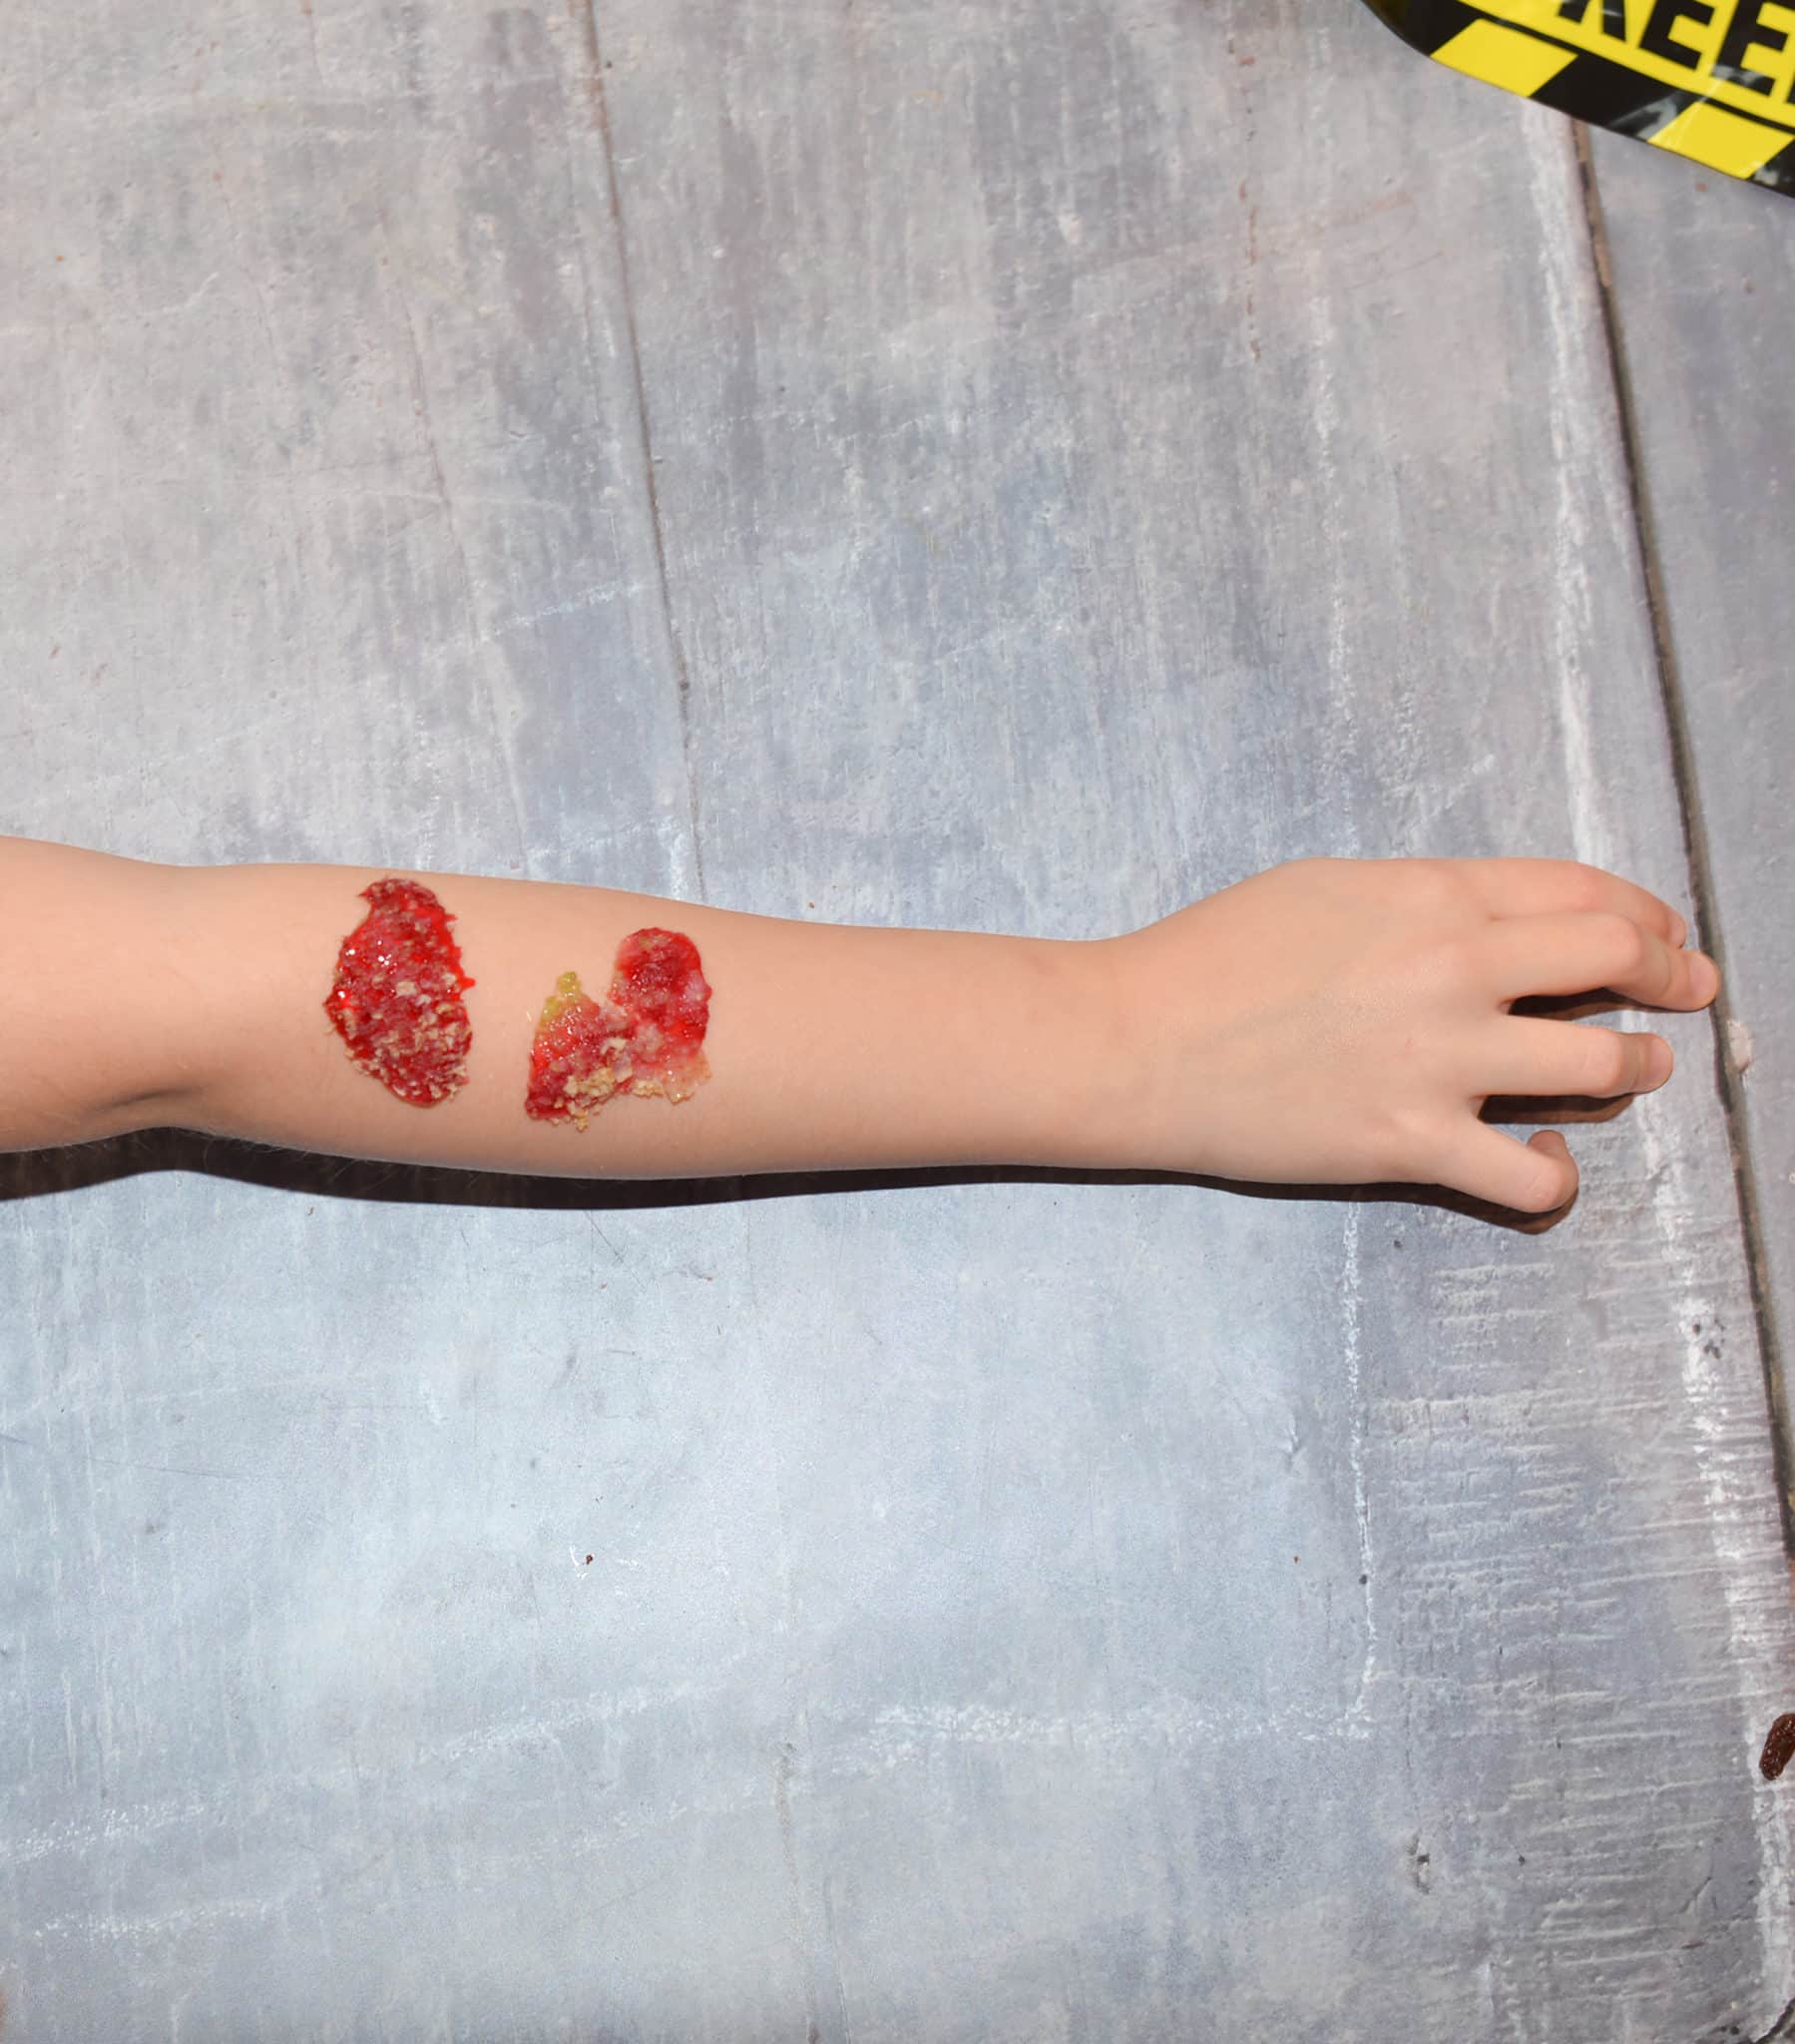 Jelly scab for learning about blood and blood clotting